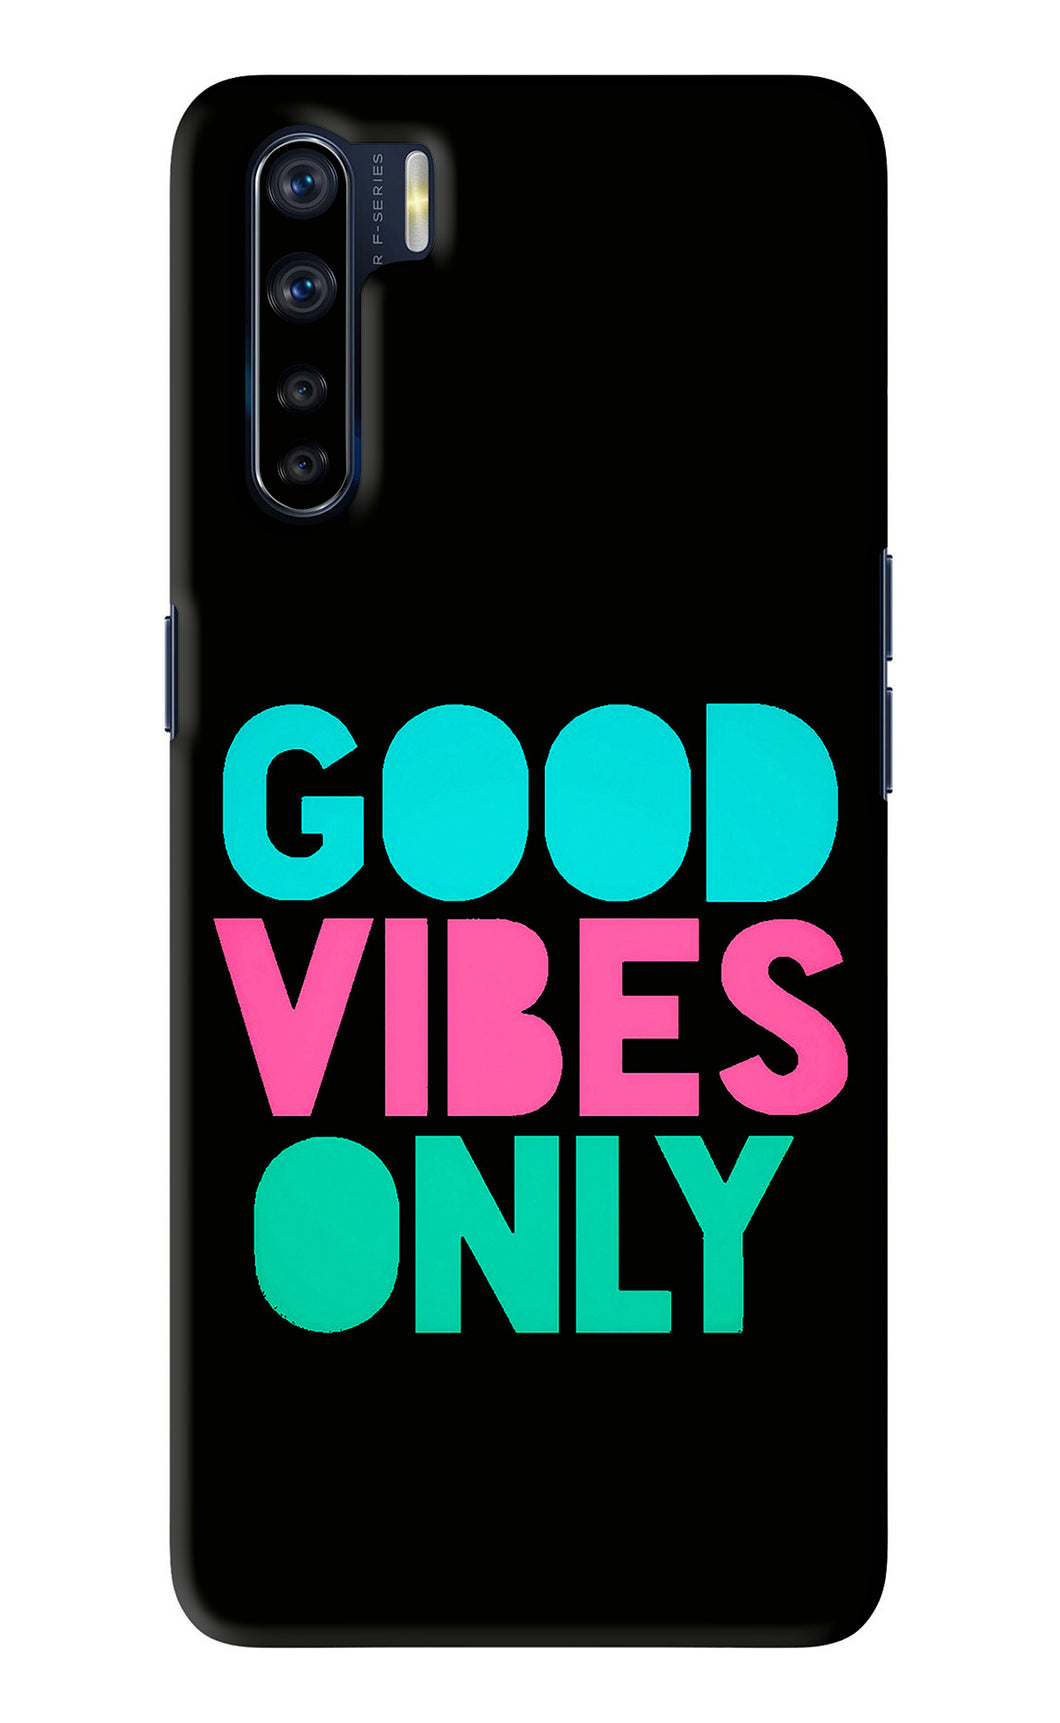 Quote Good Vibes Only Oppo F15 Back Skin Wrap